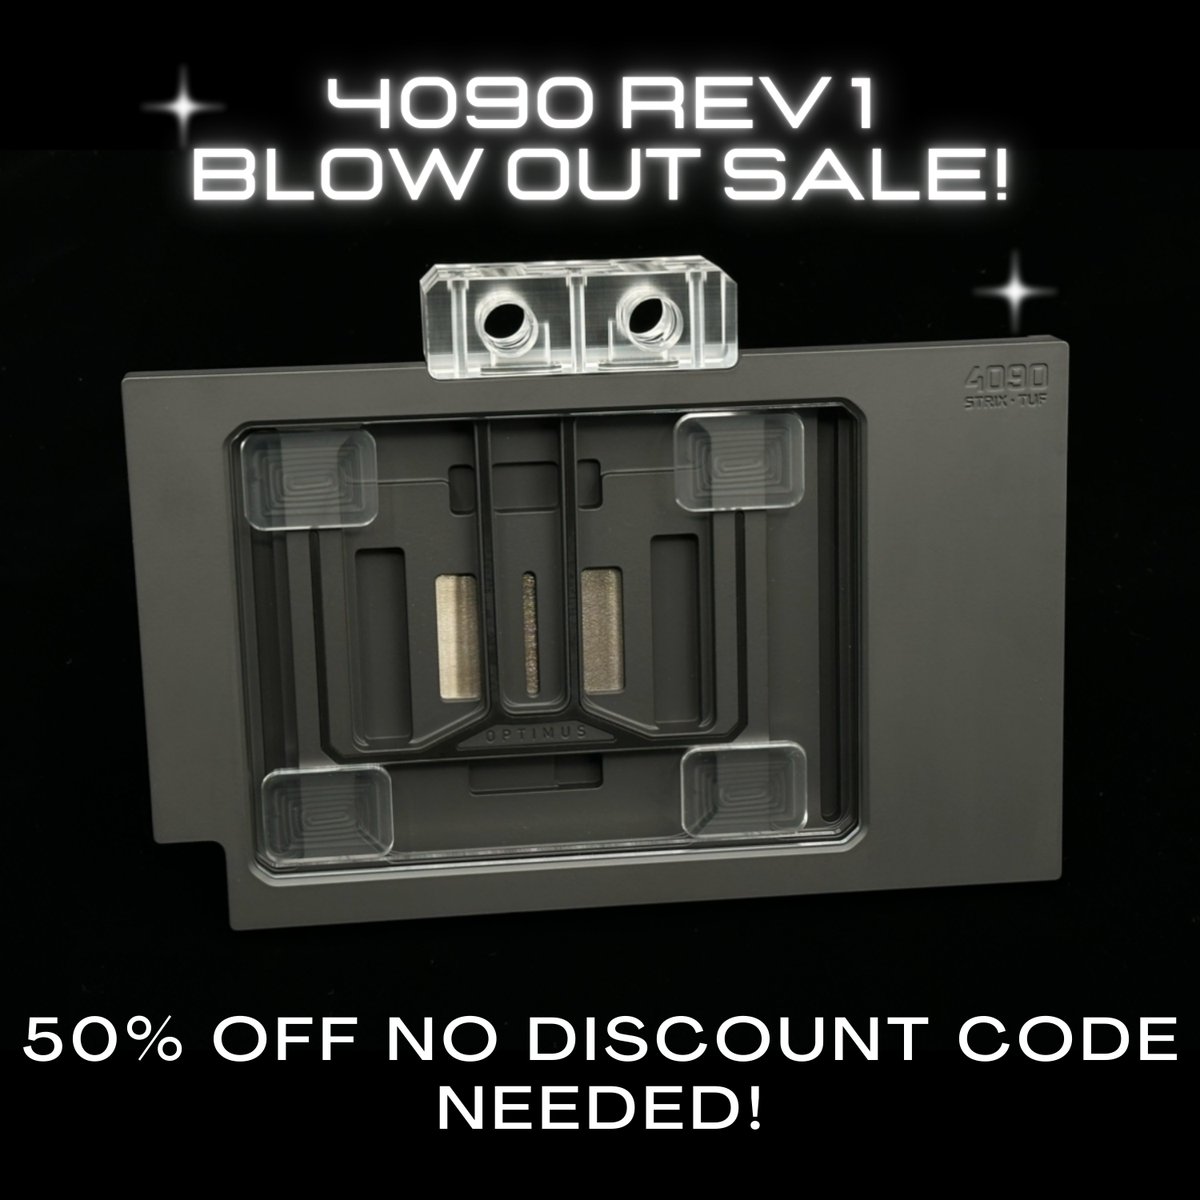 BLOW OUT SALE! - Rev1 4090 Strix/TUF GPU Block - Limited Stock - Click the link below before they sell out!! optimuspc.com/products/signa… #optimuswatercooling #watercooling #watercoolingpc #gpu #strix #liquidcooling #nvidia #waterblock #cerakote